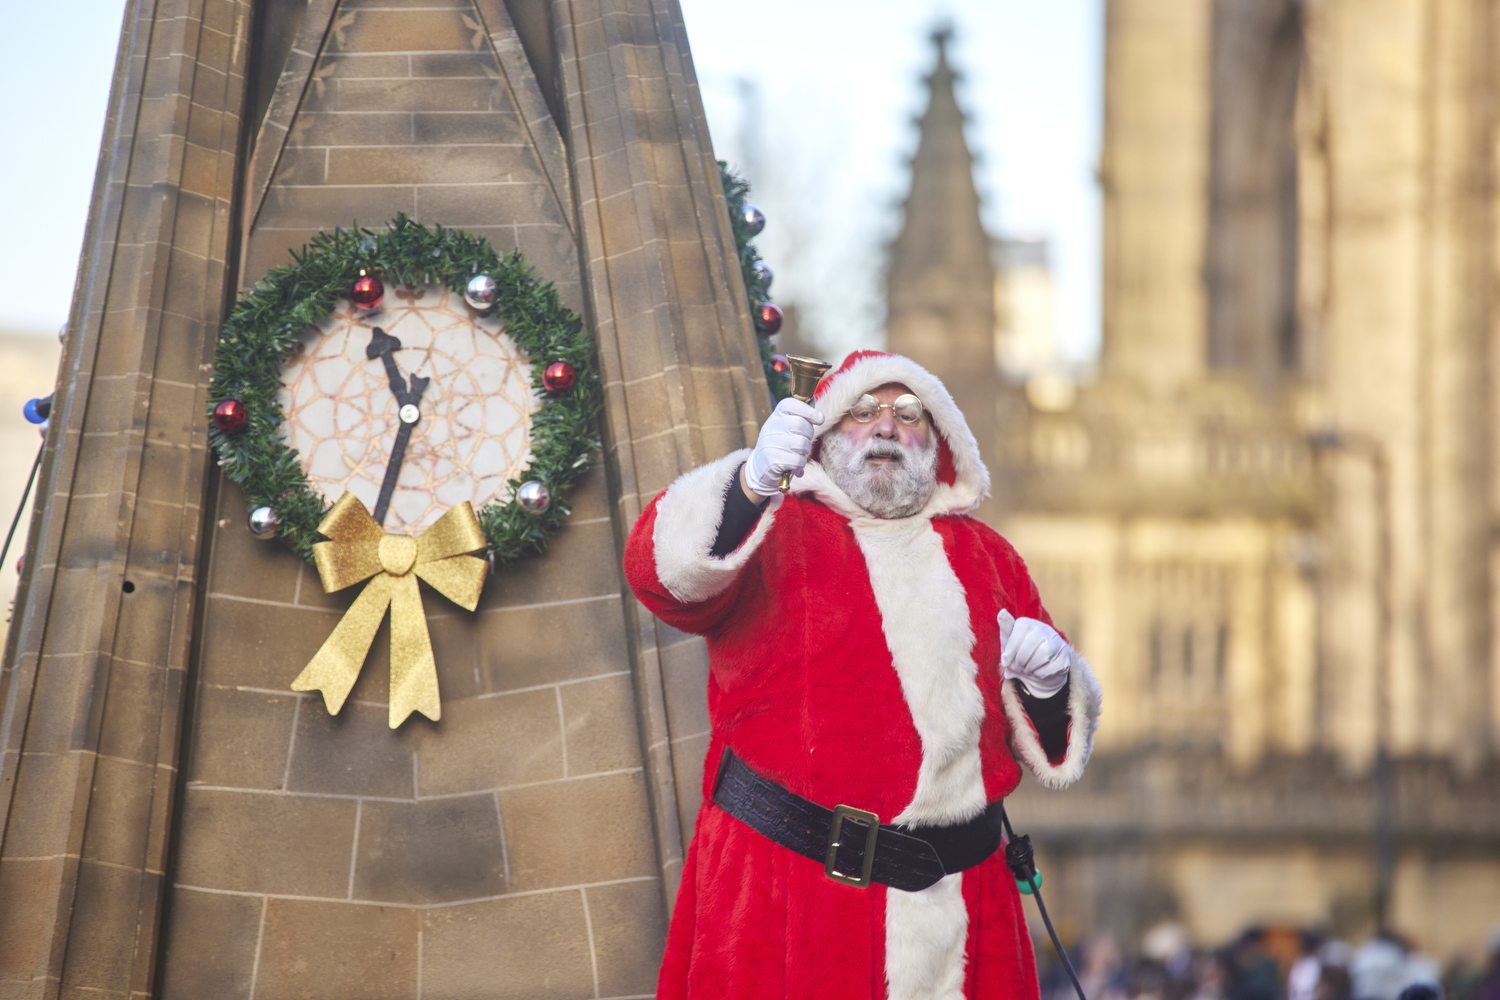 The Manchester Christmas Parade is this weekend – all you need to know!